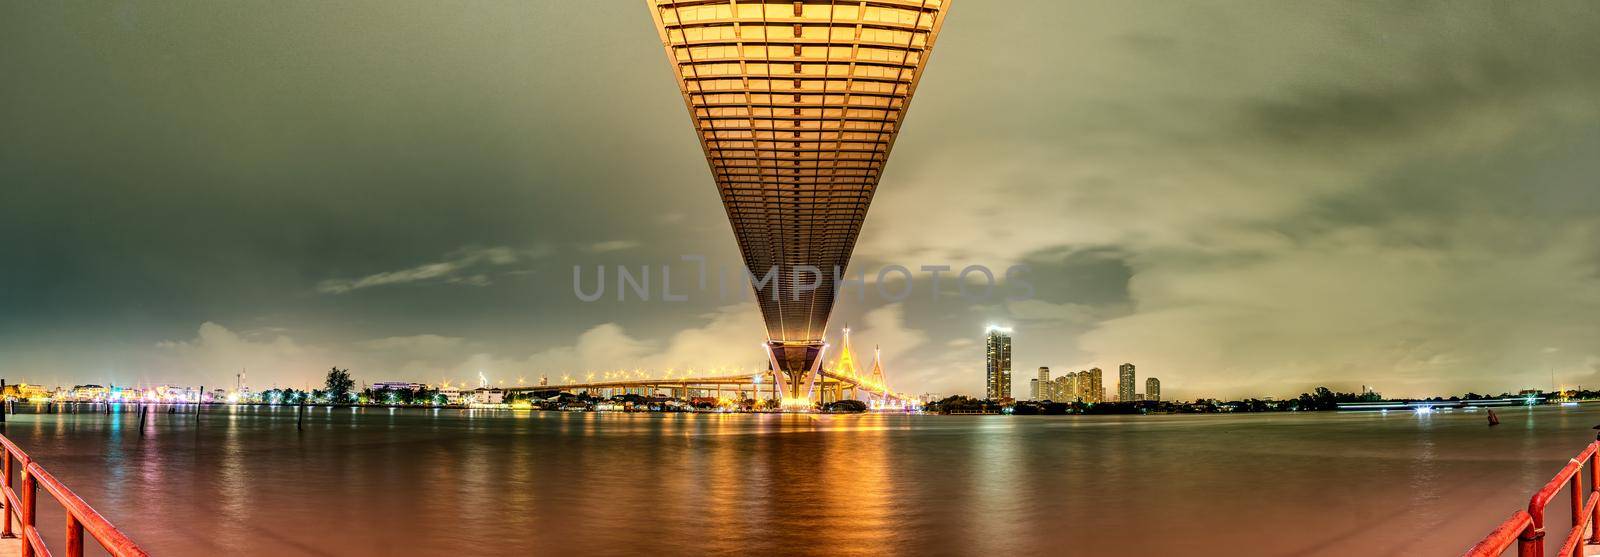 Panorama Oreng led light under the bridge over the river On a cloudy day in the sky. Bhumibol Bridge, Samut Prakan, Thailand by put3d